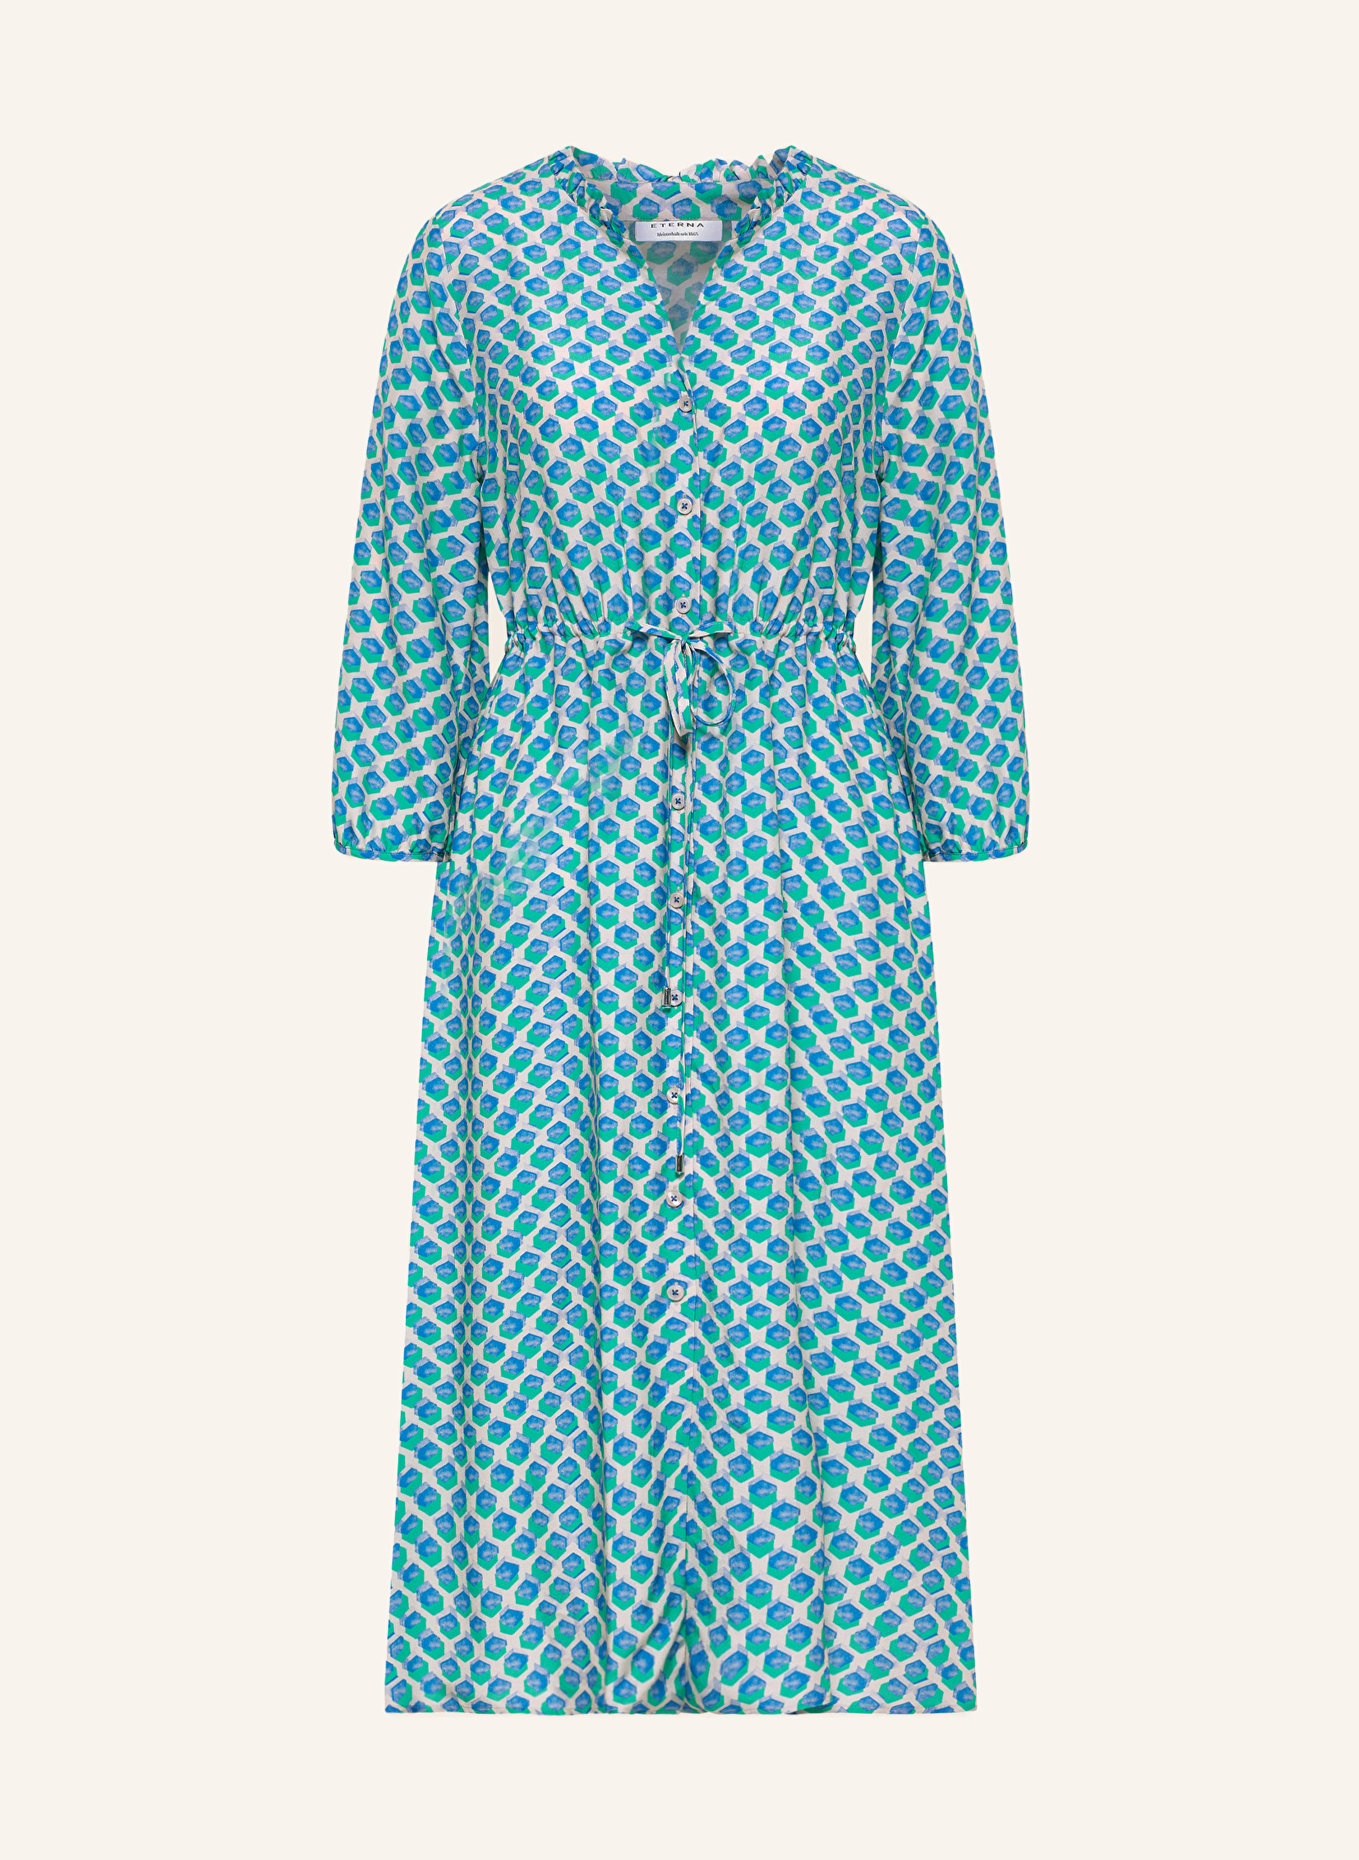 ETERNA Shirt dress with 3/4 sleeves, Color: BLUE/ GREEN/ LIGHT GRAY (Image 1)